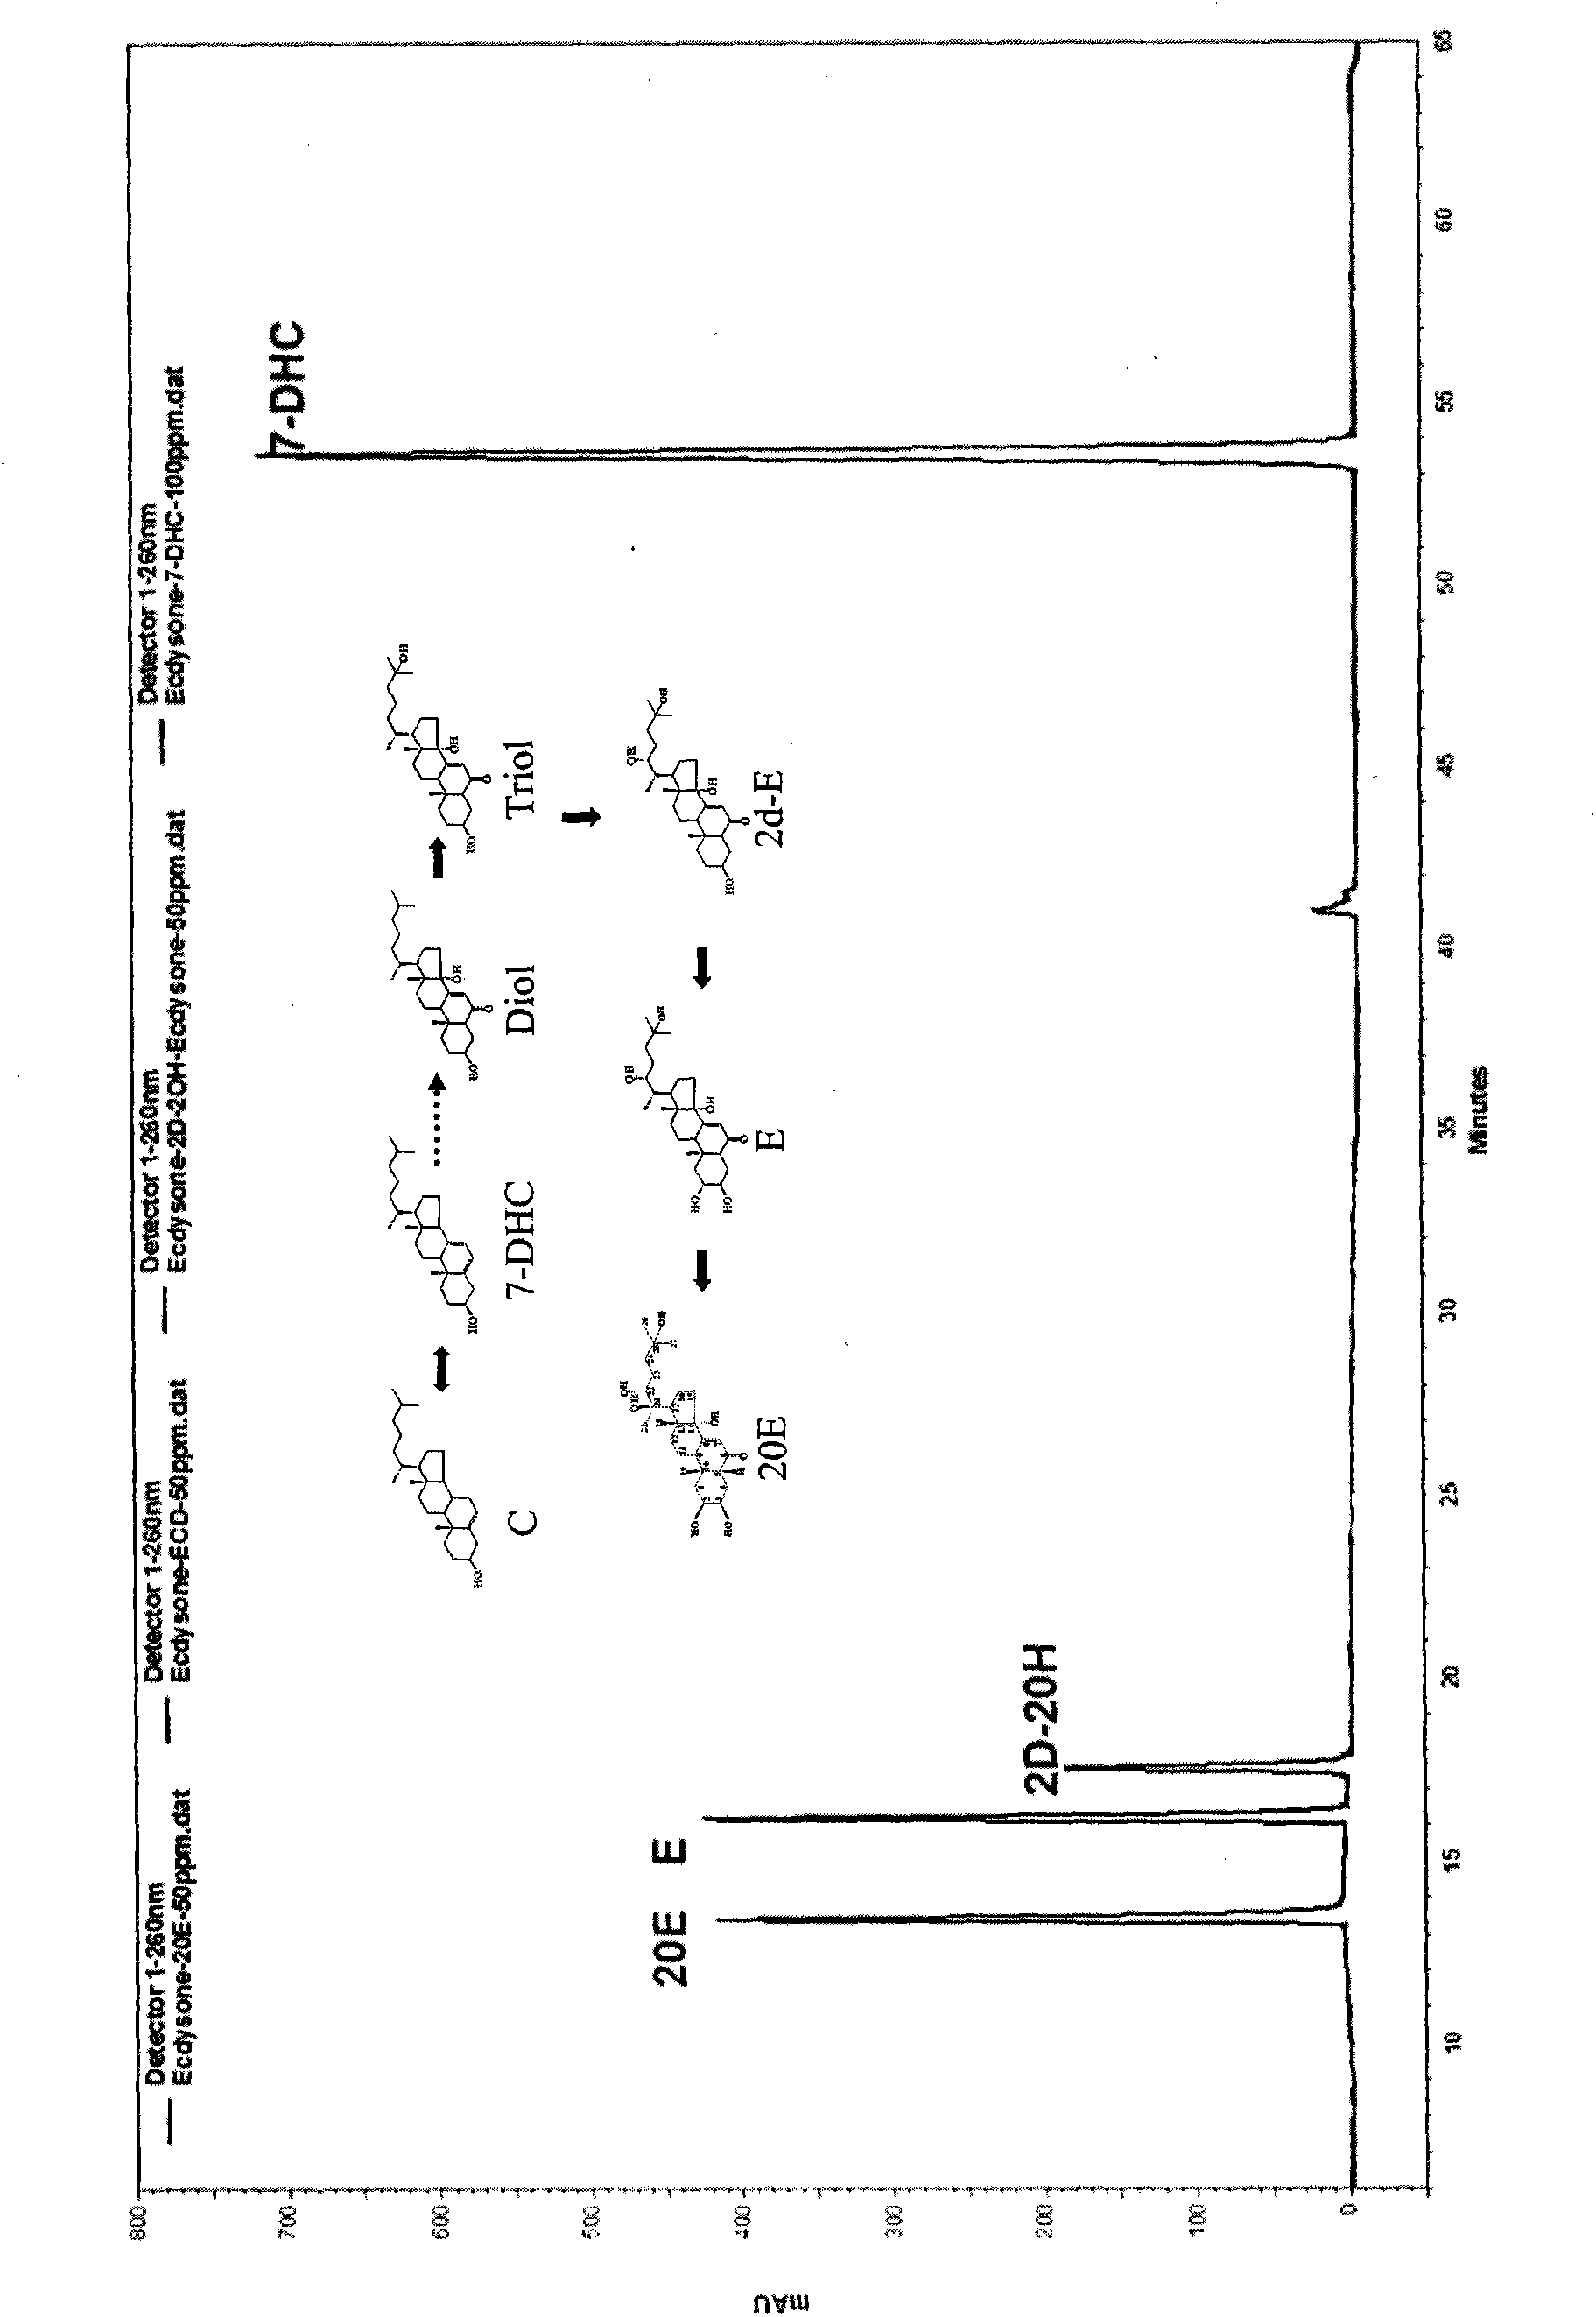 Method applying HPLC and simultaneously determining phytoecdysone substance